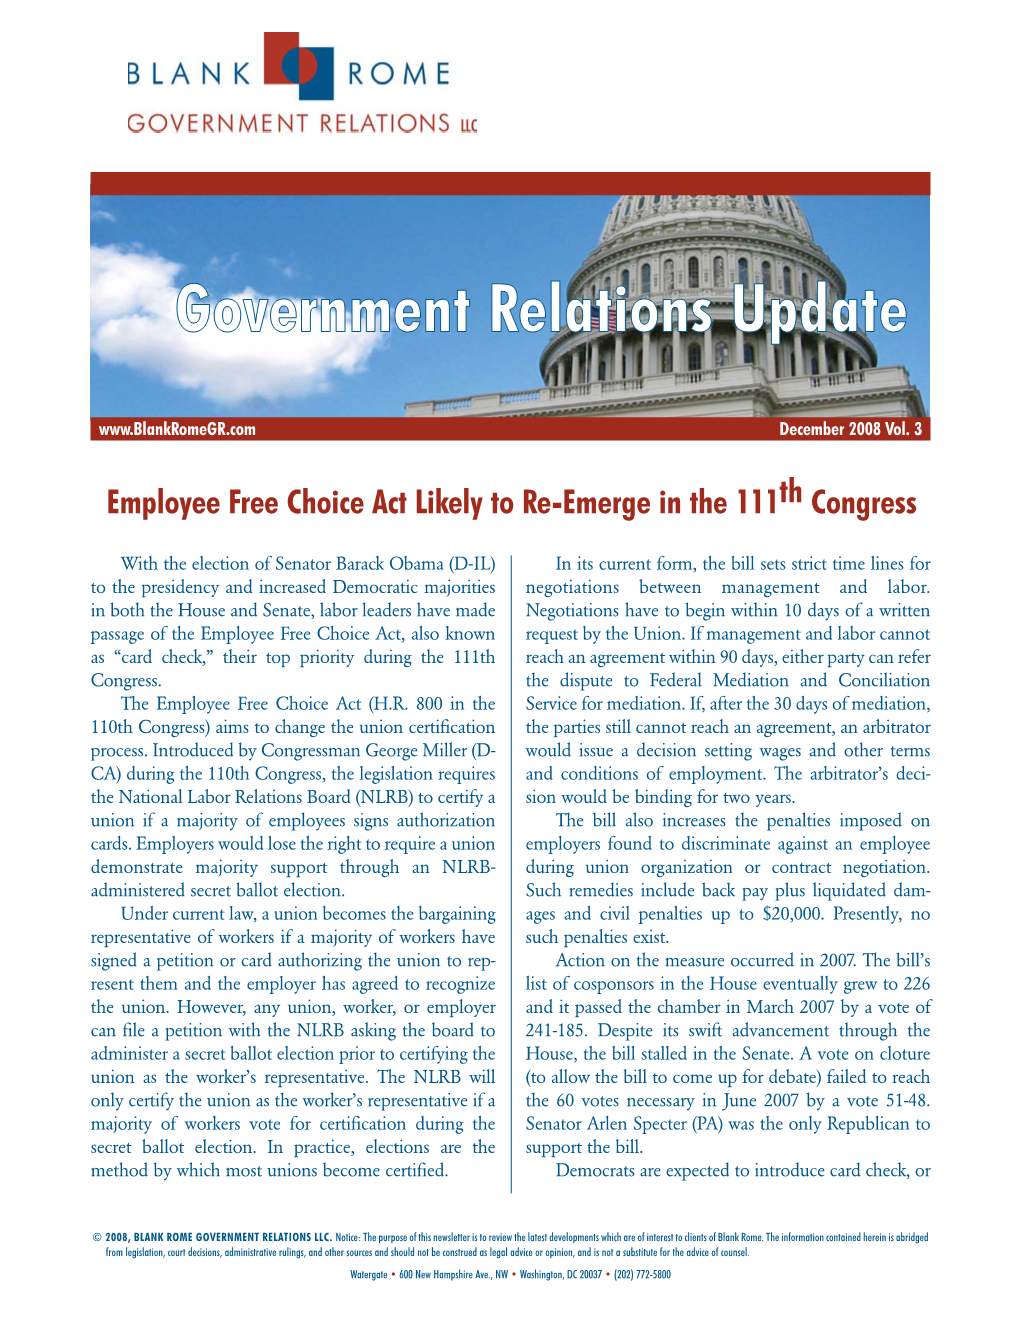 Employee Free Choice Act Likely to Re-Emerge in the 111Th Congress